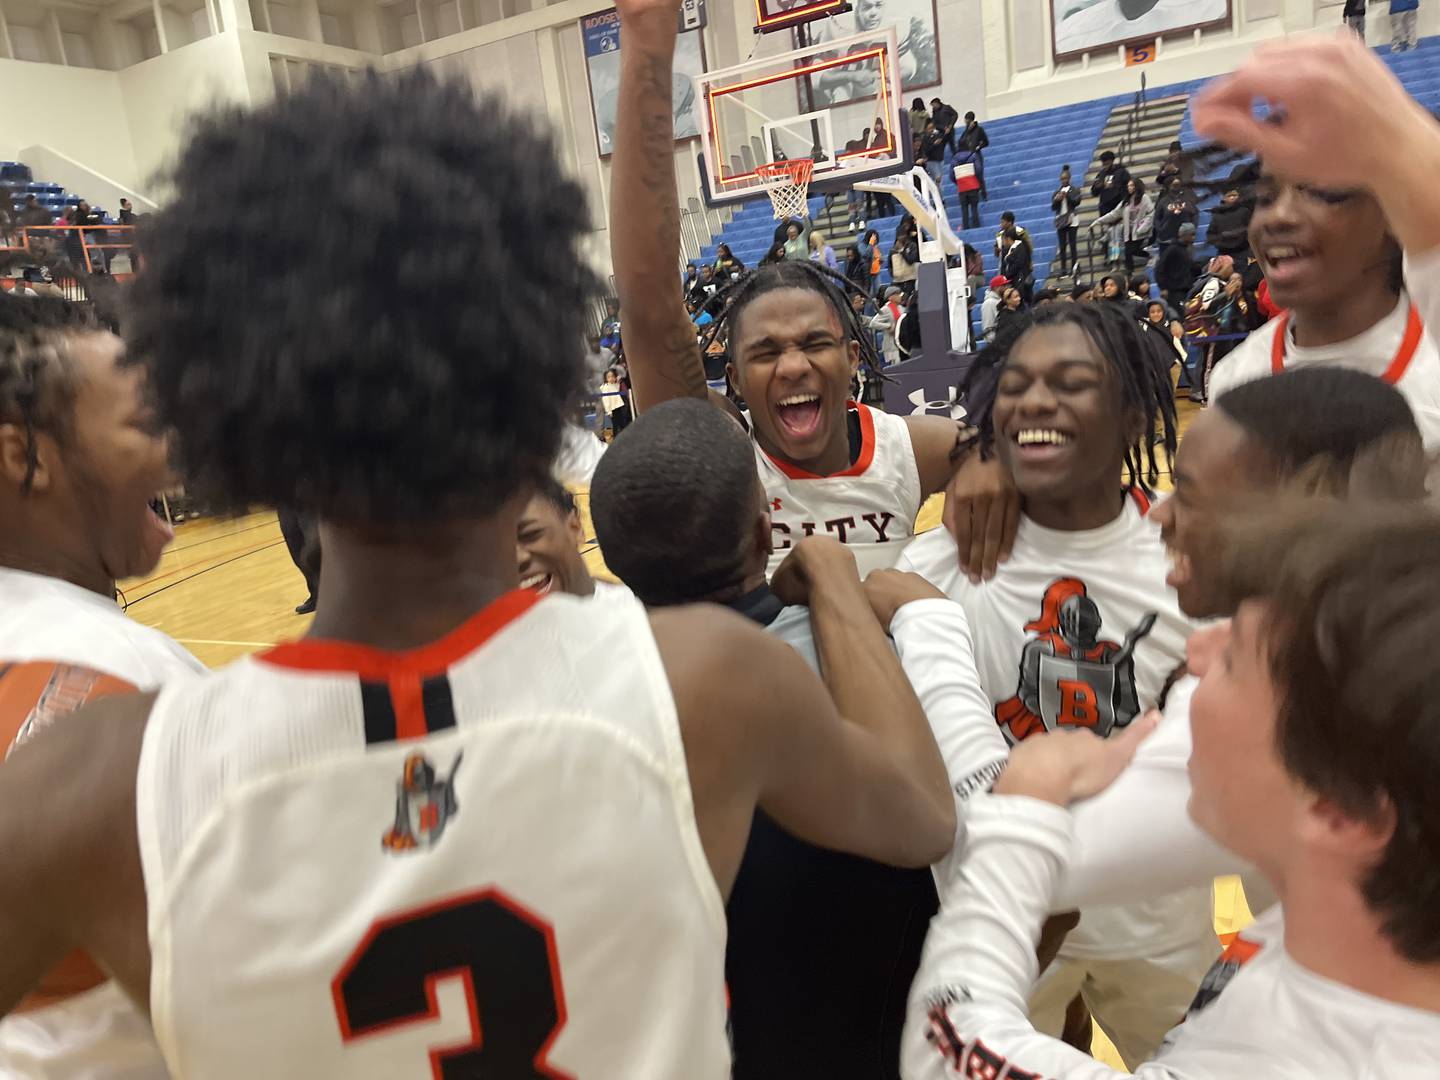 City players celebrate after winning the Baltimore City boys basketball championship Tuesday evening. The No. 3 Knights defeated Edmondson, 52-46, in front of 3,000 at Morgan State University.